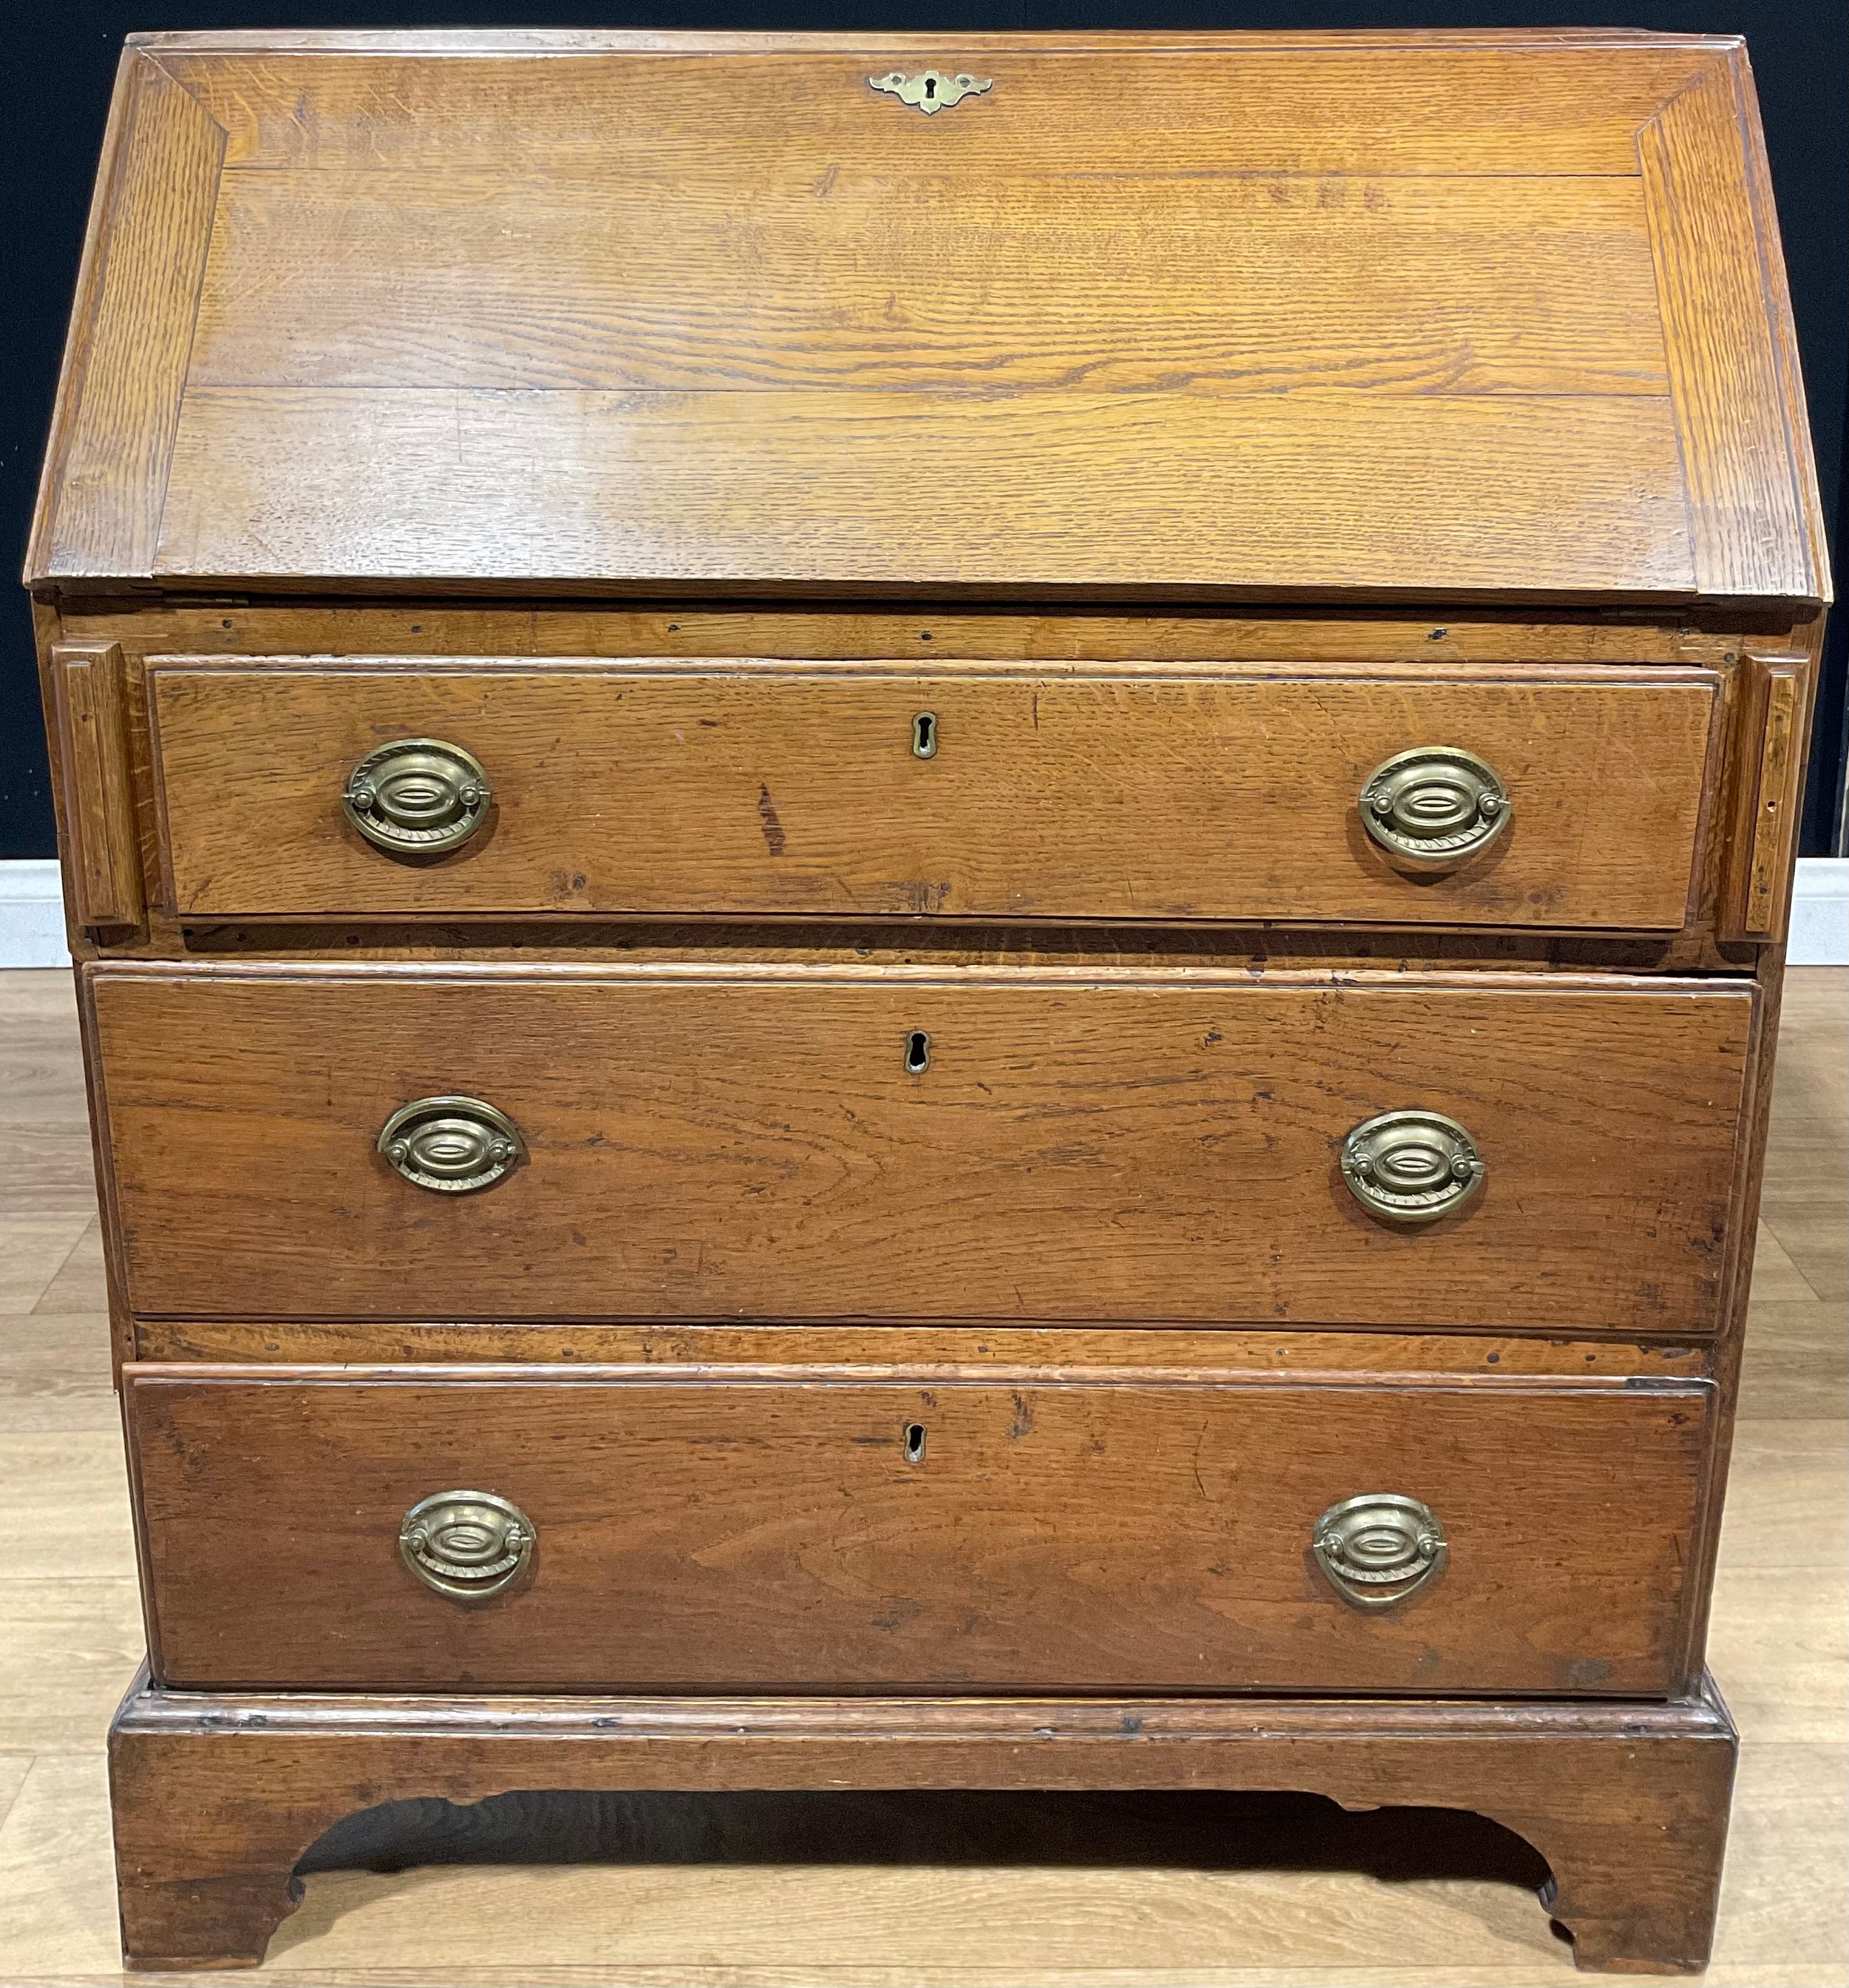 A George III oak bureau, fall front enclosing small drawers and pigeonholes, above three long